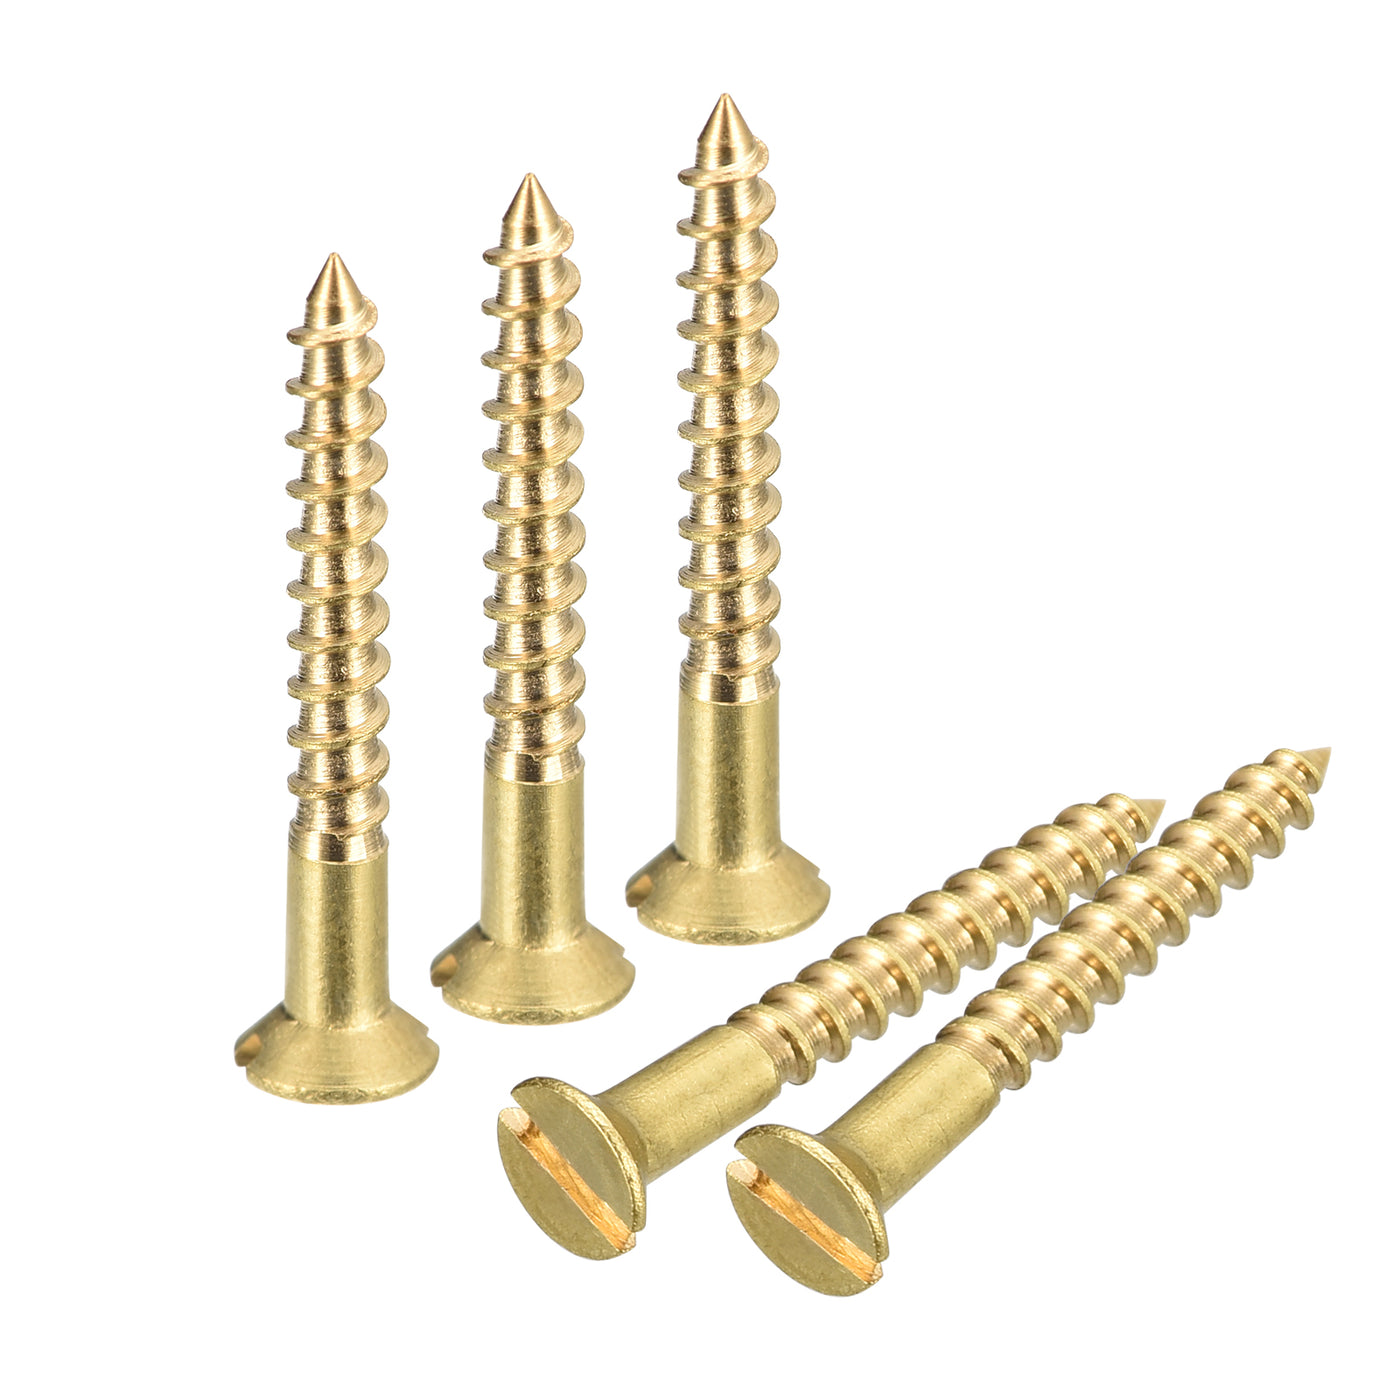 uxcell Uxcell 50Pcs M2.5 x 20mm Brass Slotted Drive Flat Head Wood Screws Self Tapping Screw